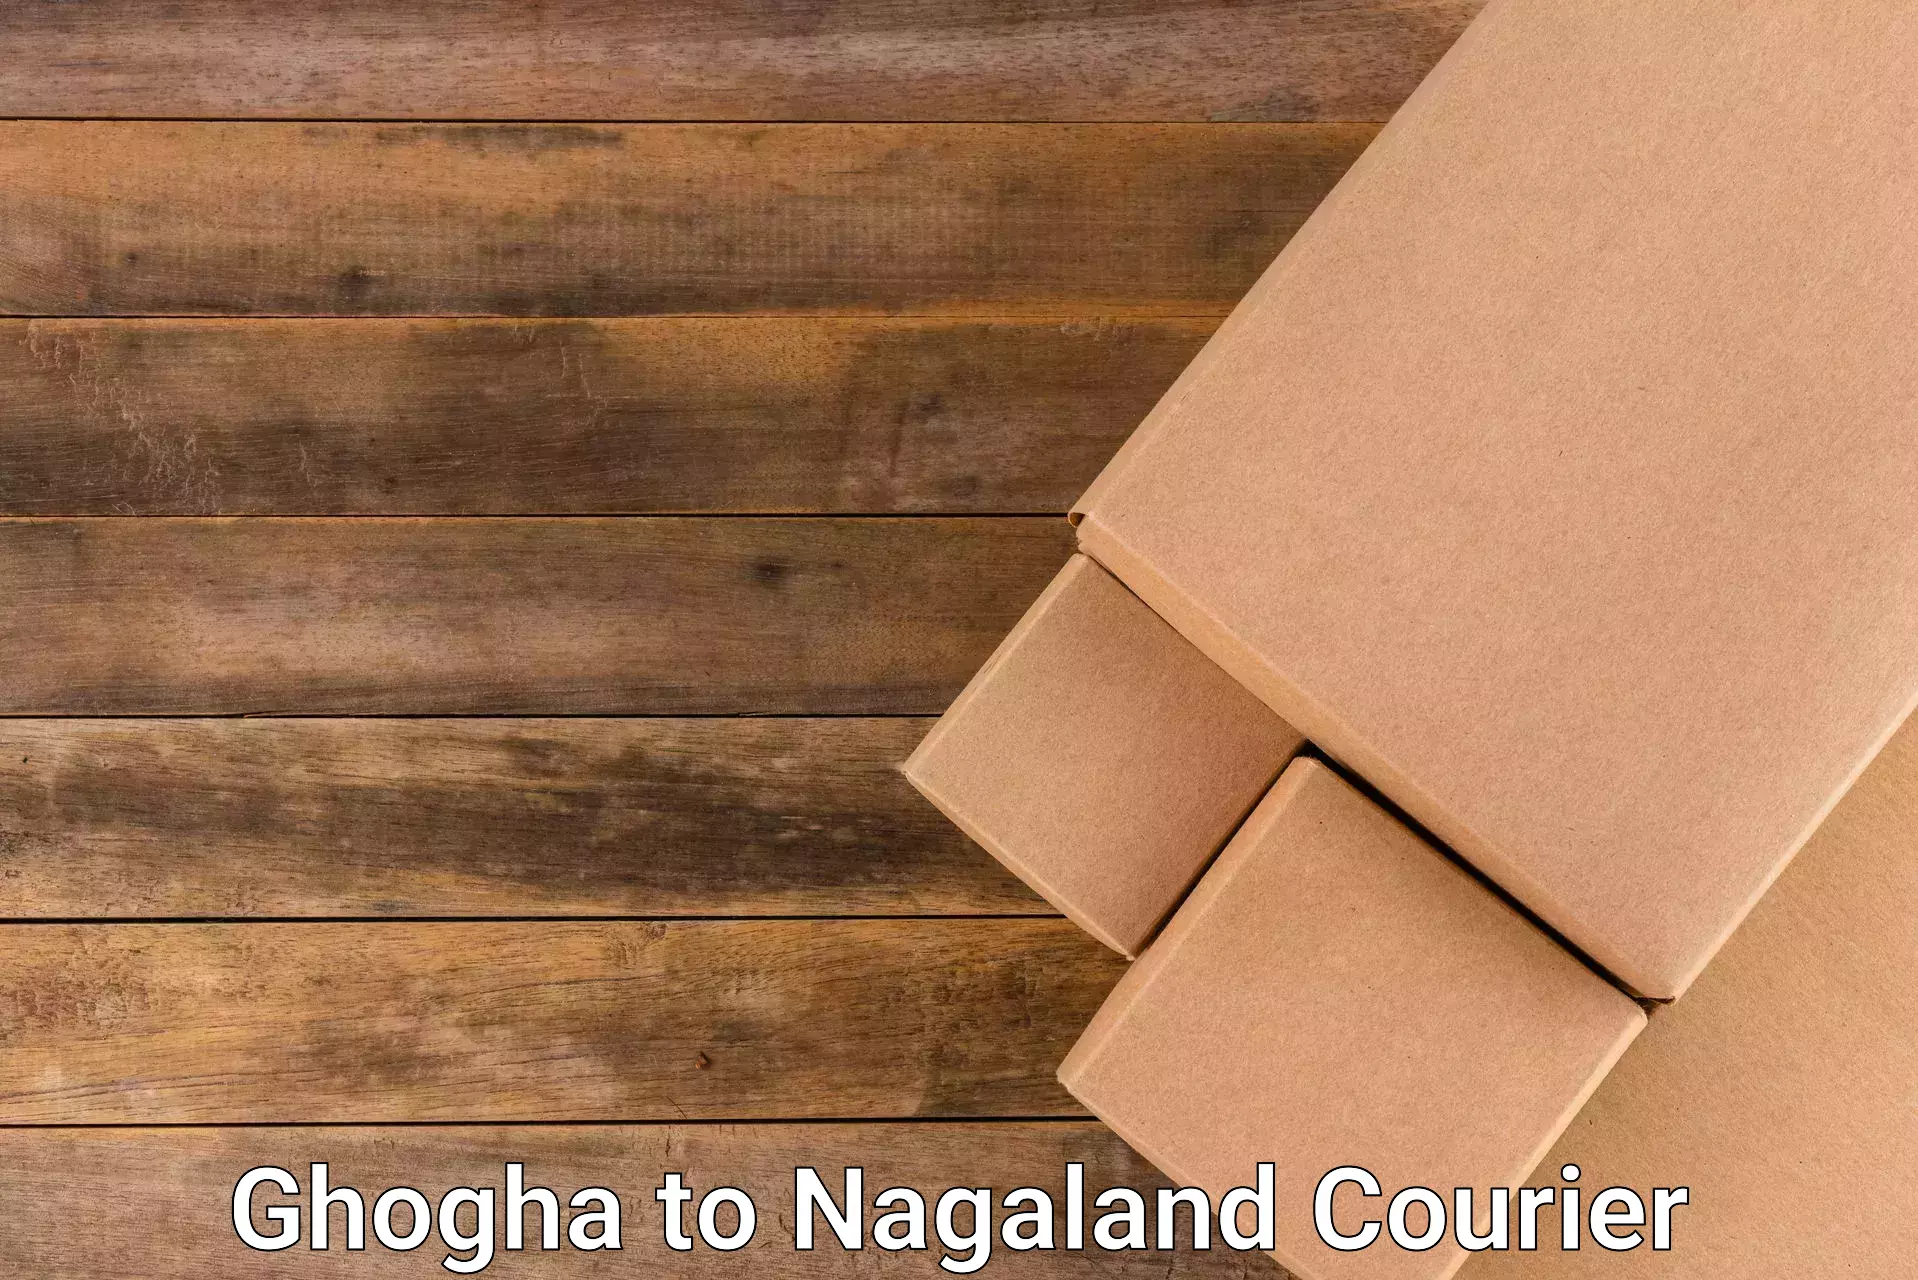 Affordable parcel service Ghogha to Nagaland